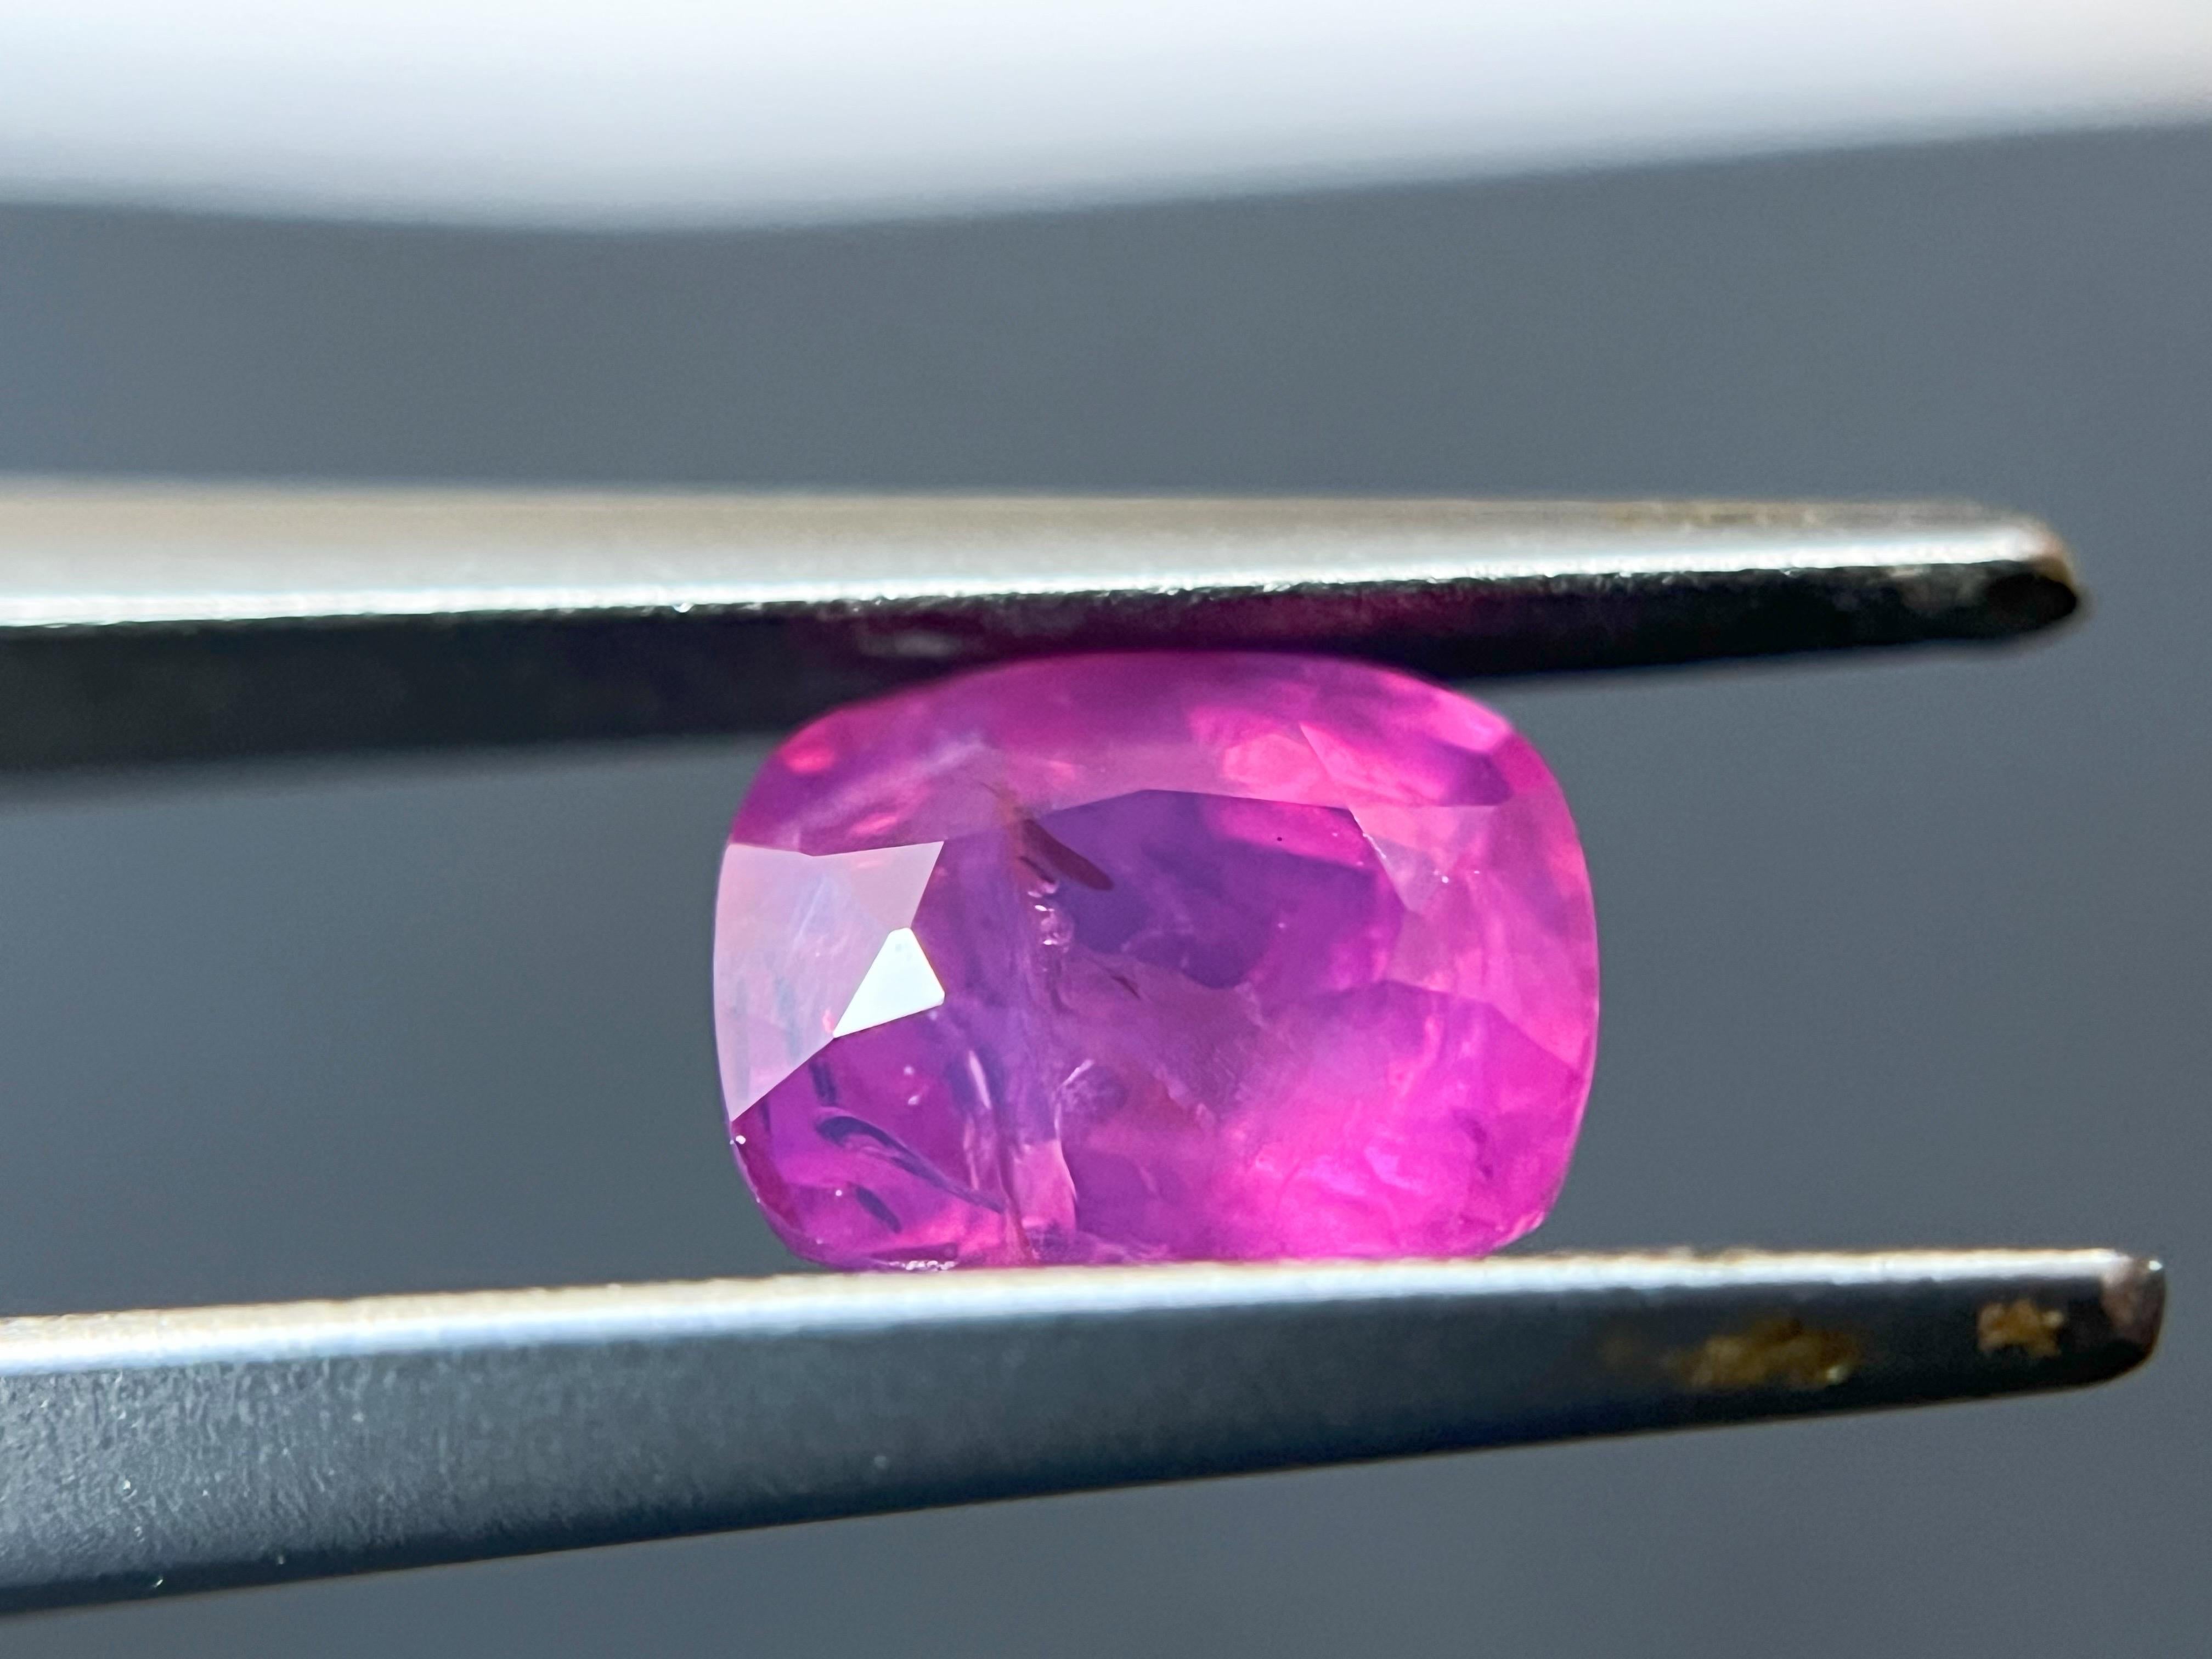 Introducing a stunning natural vivid pink sapphire, weighing 1.4 carats, that is sure to capture your heart. This gemstone boasts a vibrant and lively color that is simply breathtaking. Its vivid pink hue is completely natural, making it a unique